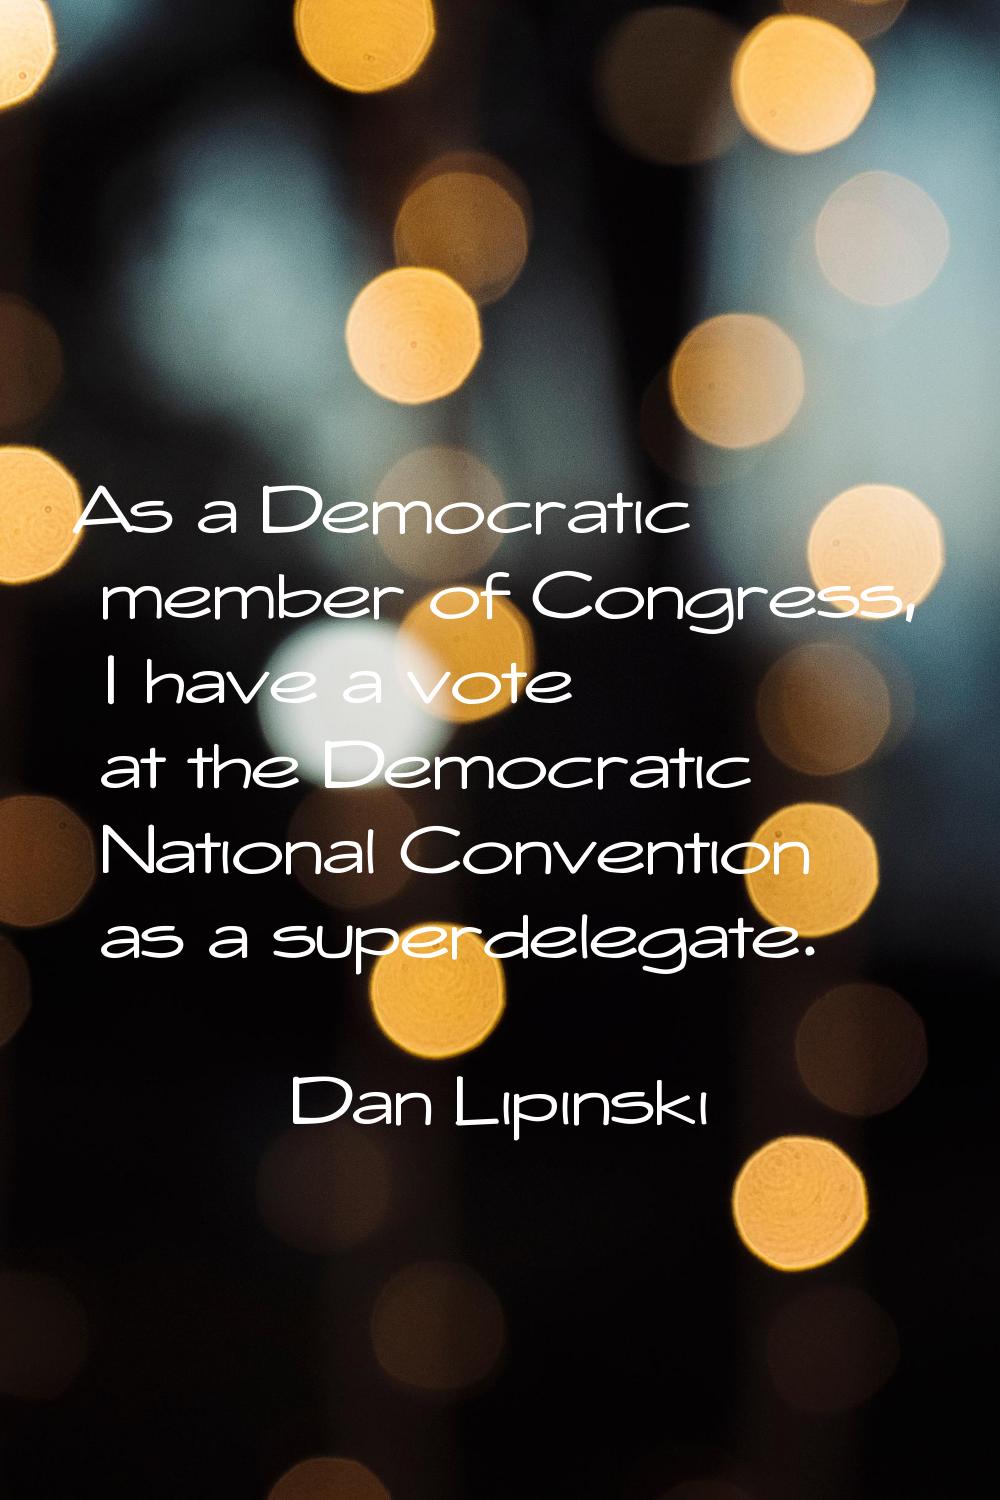 As a Democratic member of Congress, I have a vote at the Democratic National Convention as a superd